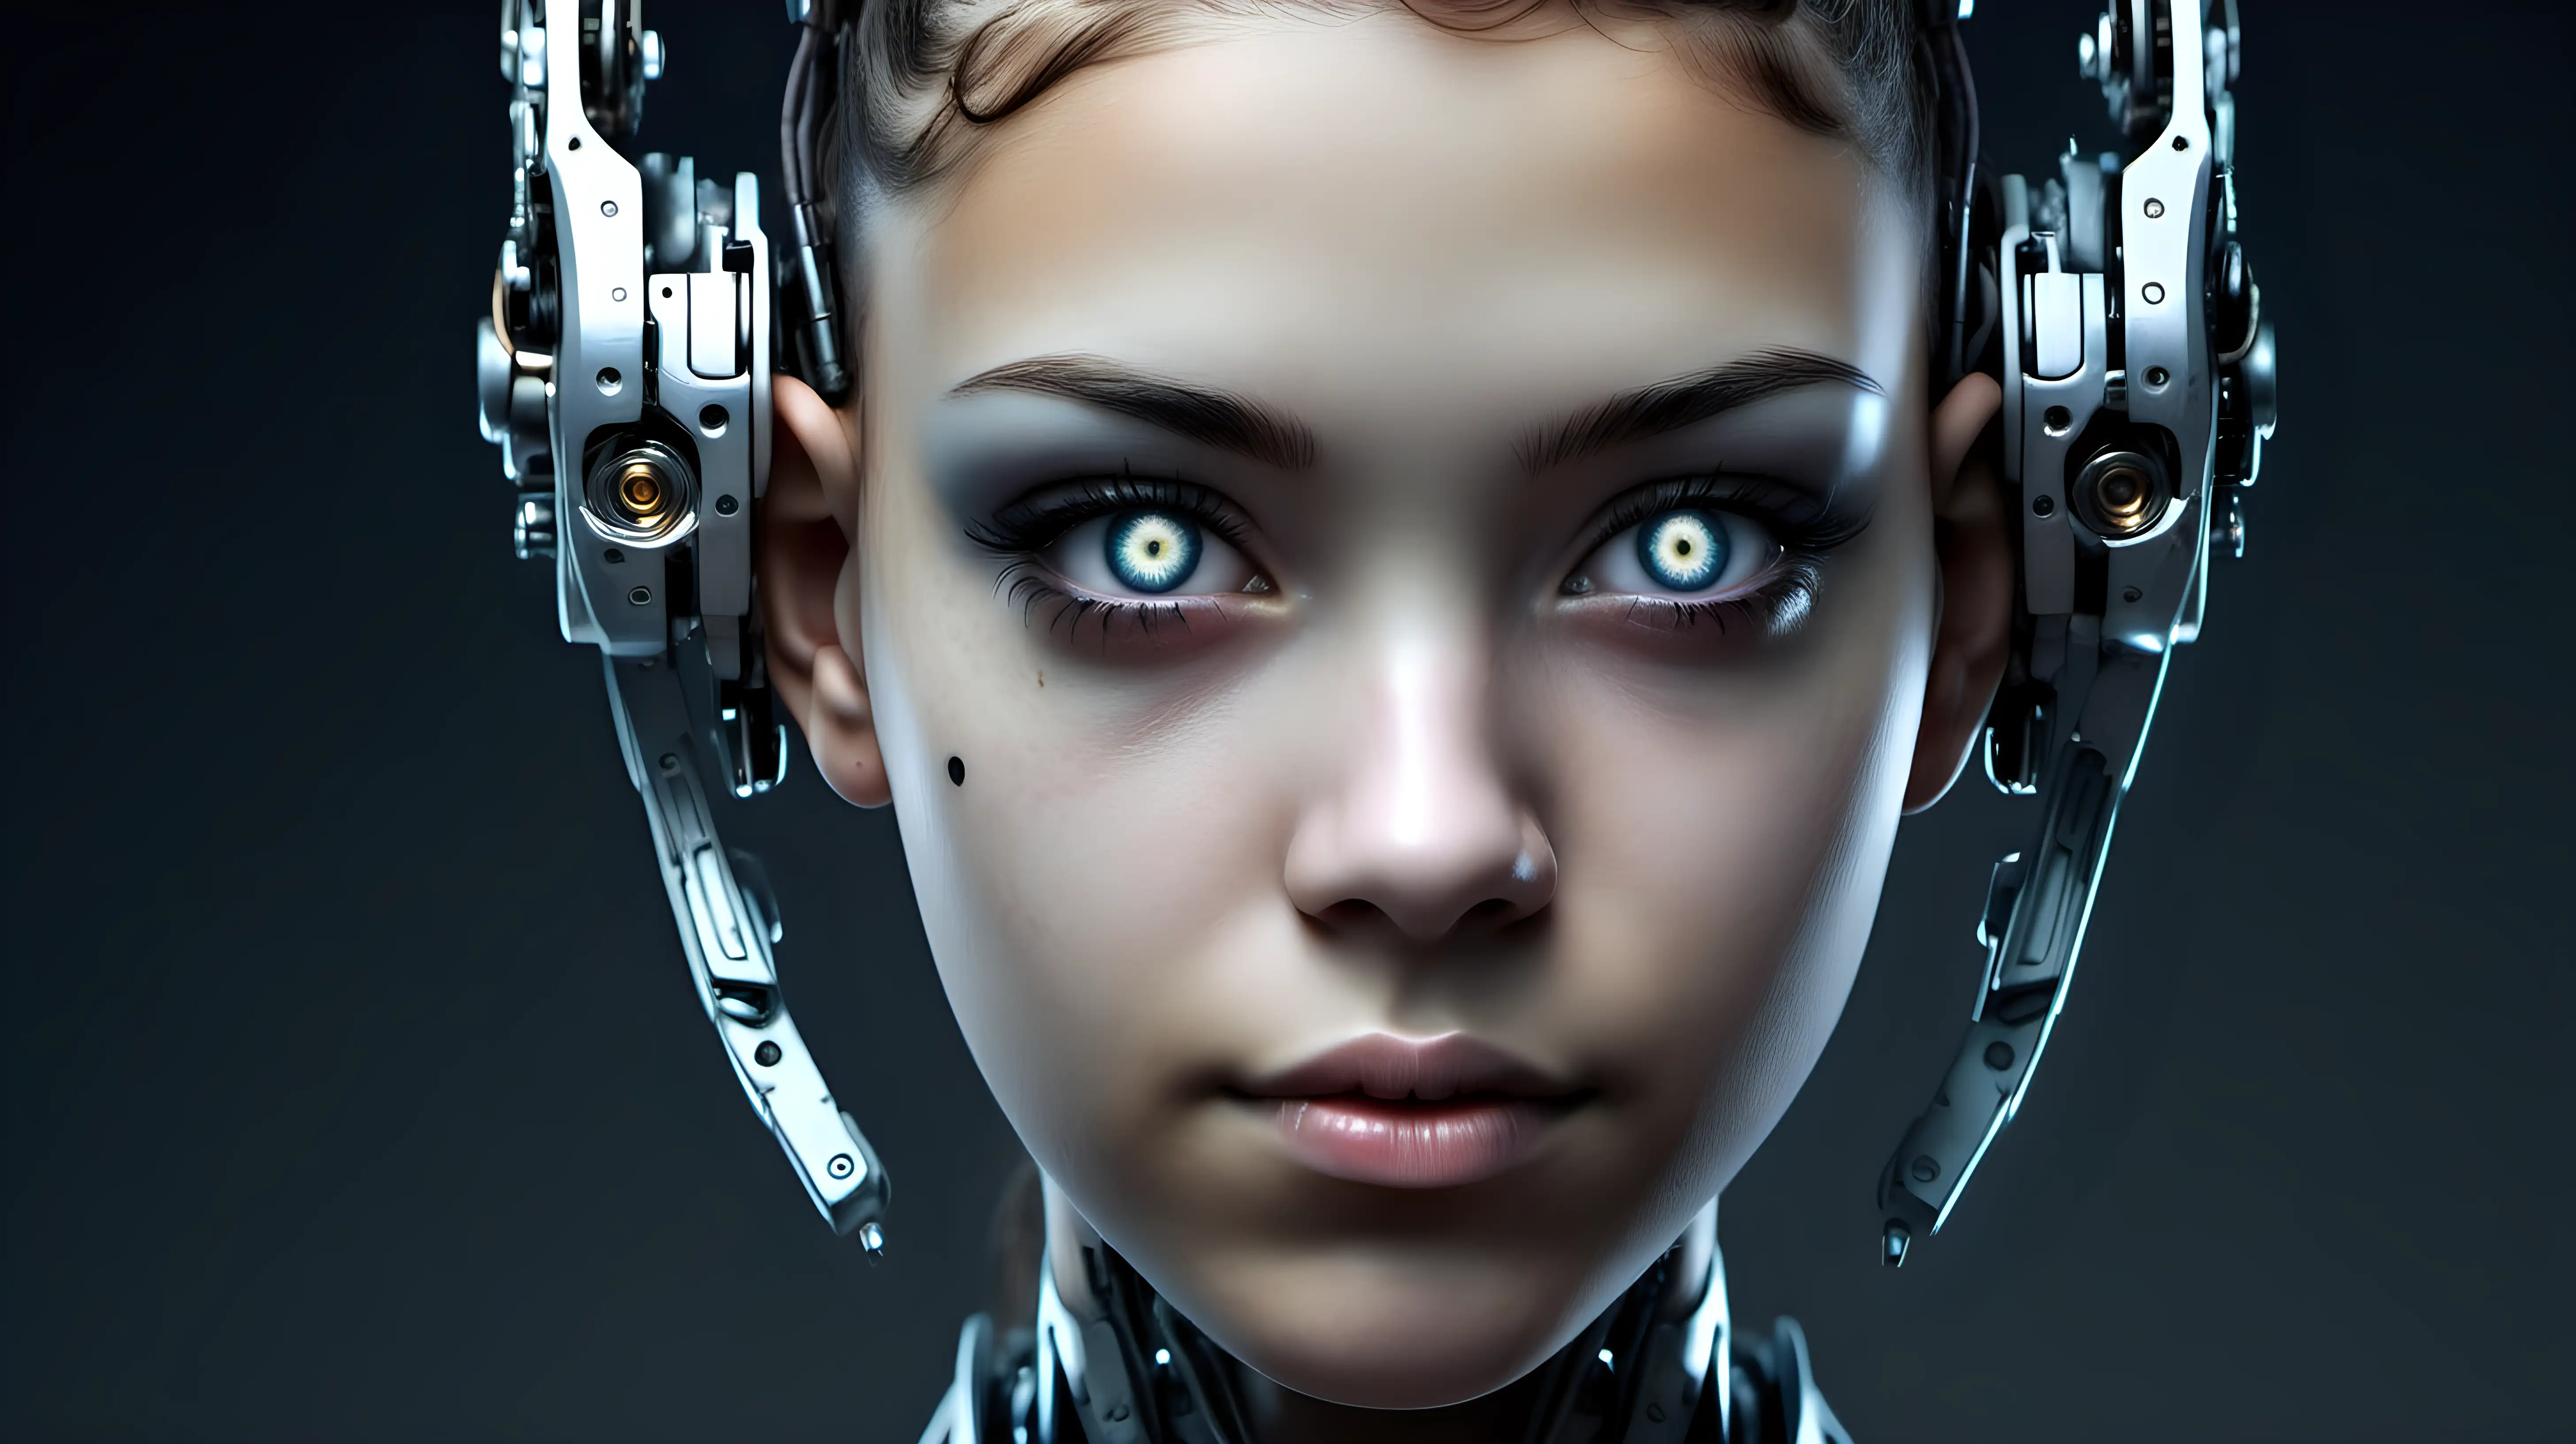 Cyborg woman, 18 years old. She has a cyborg face, but she is extremely beautiful. Natural eyes. She has beautiful ears.